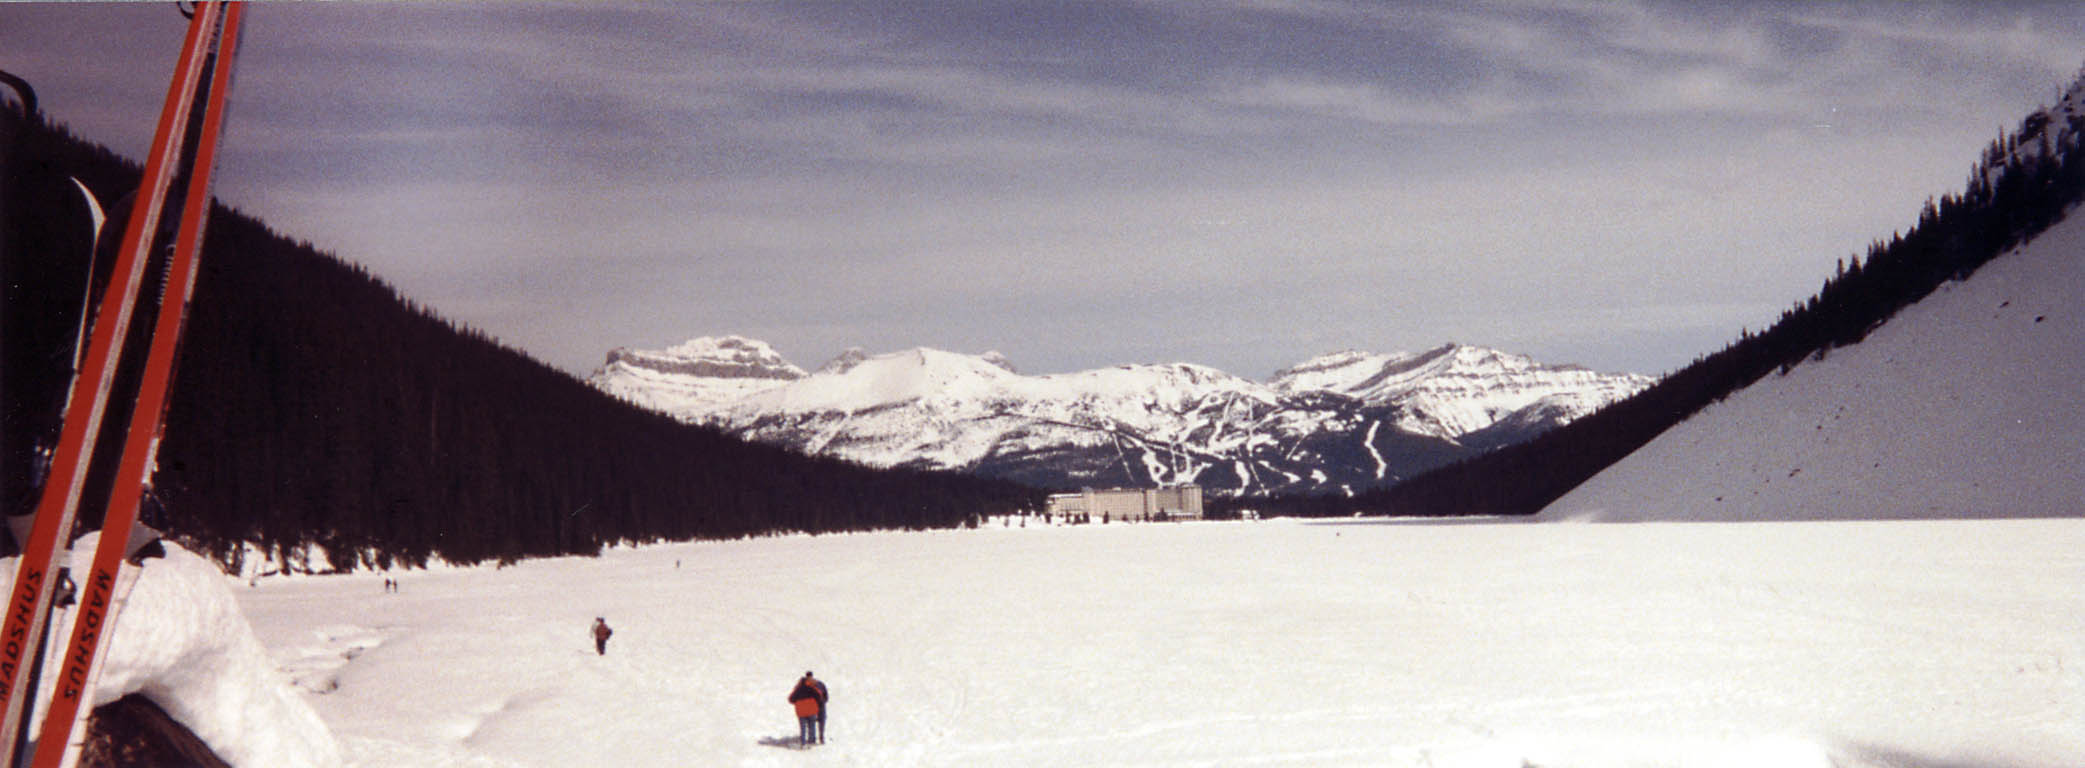 Frozen Lake Louise with the hotel and Rockies in the background. (Category:  Skiing)